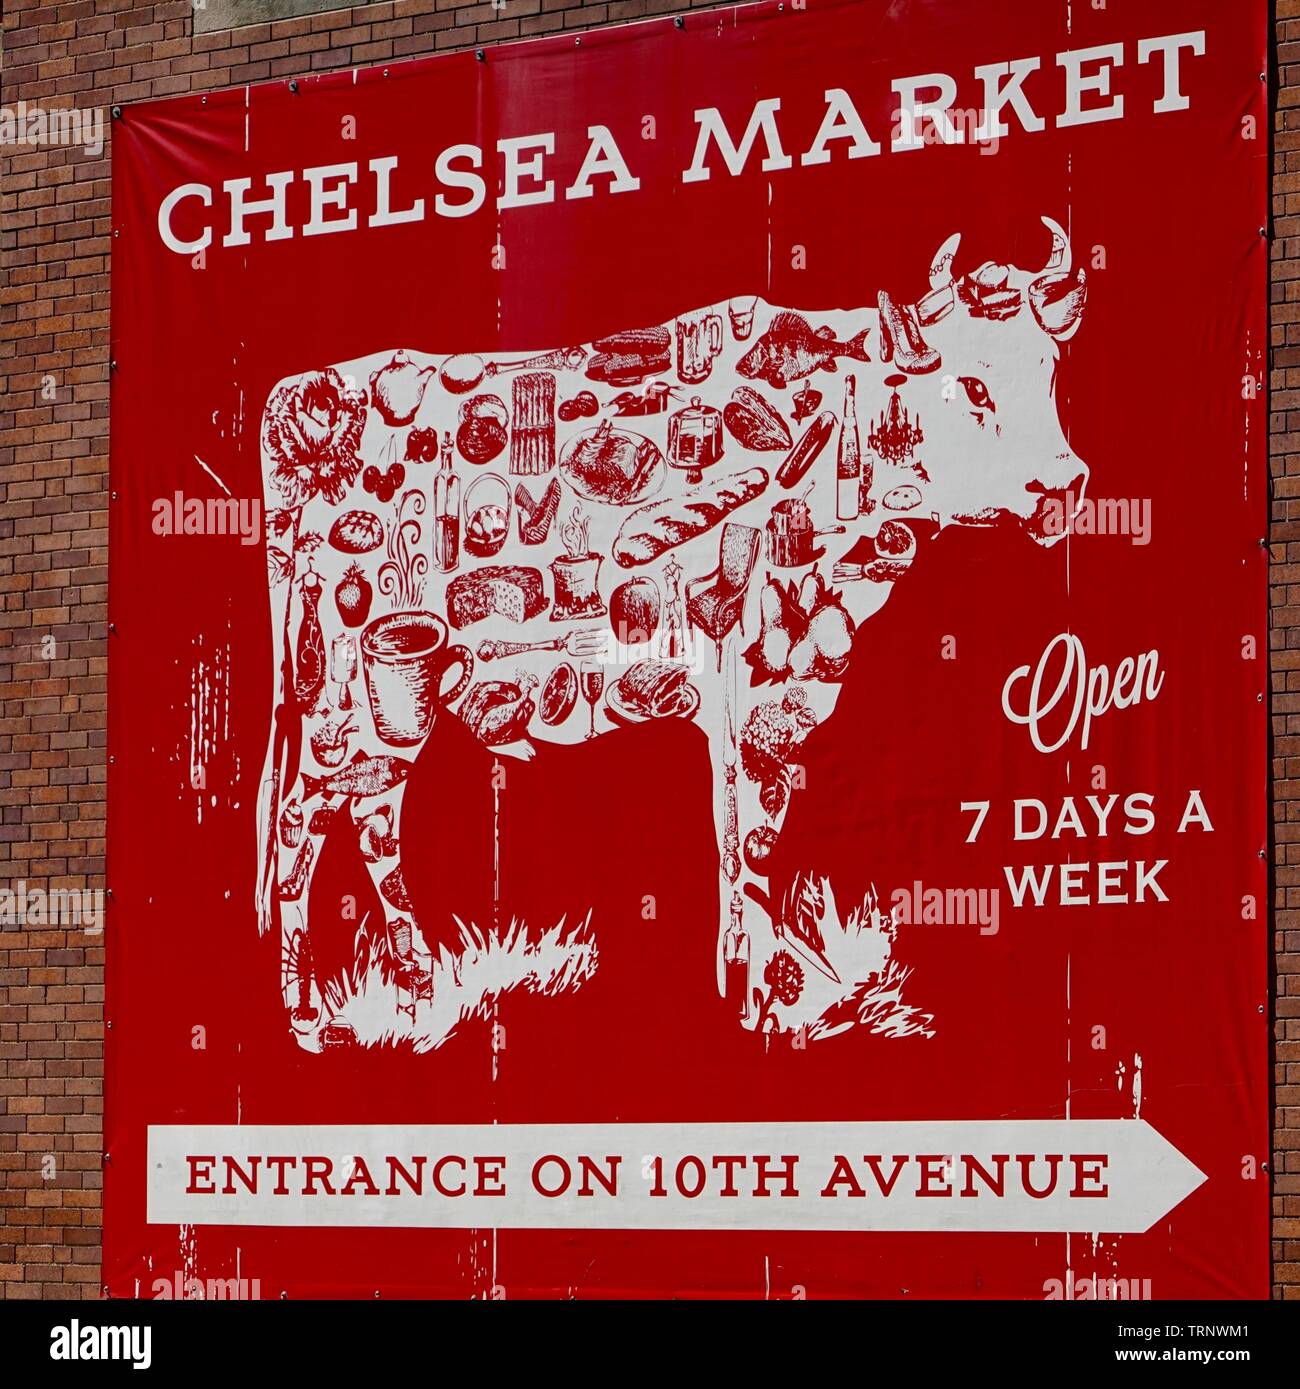 Chelsea Market sign, banner, with cow graphic, New York, NY, USA Stock Photo